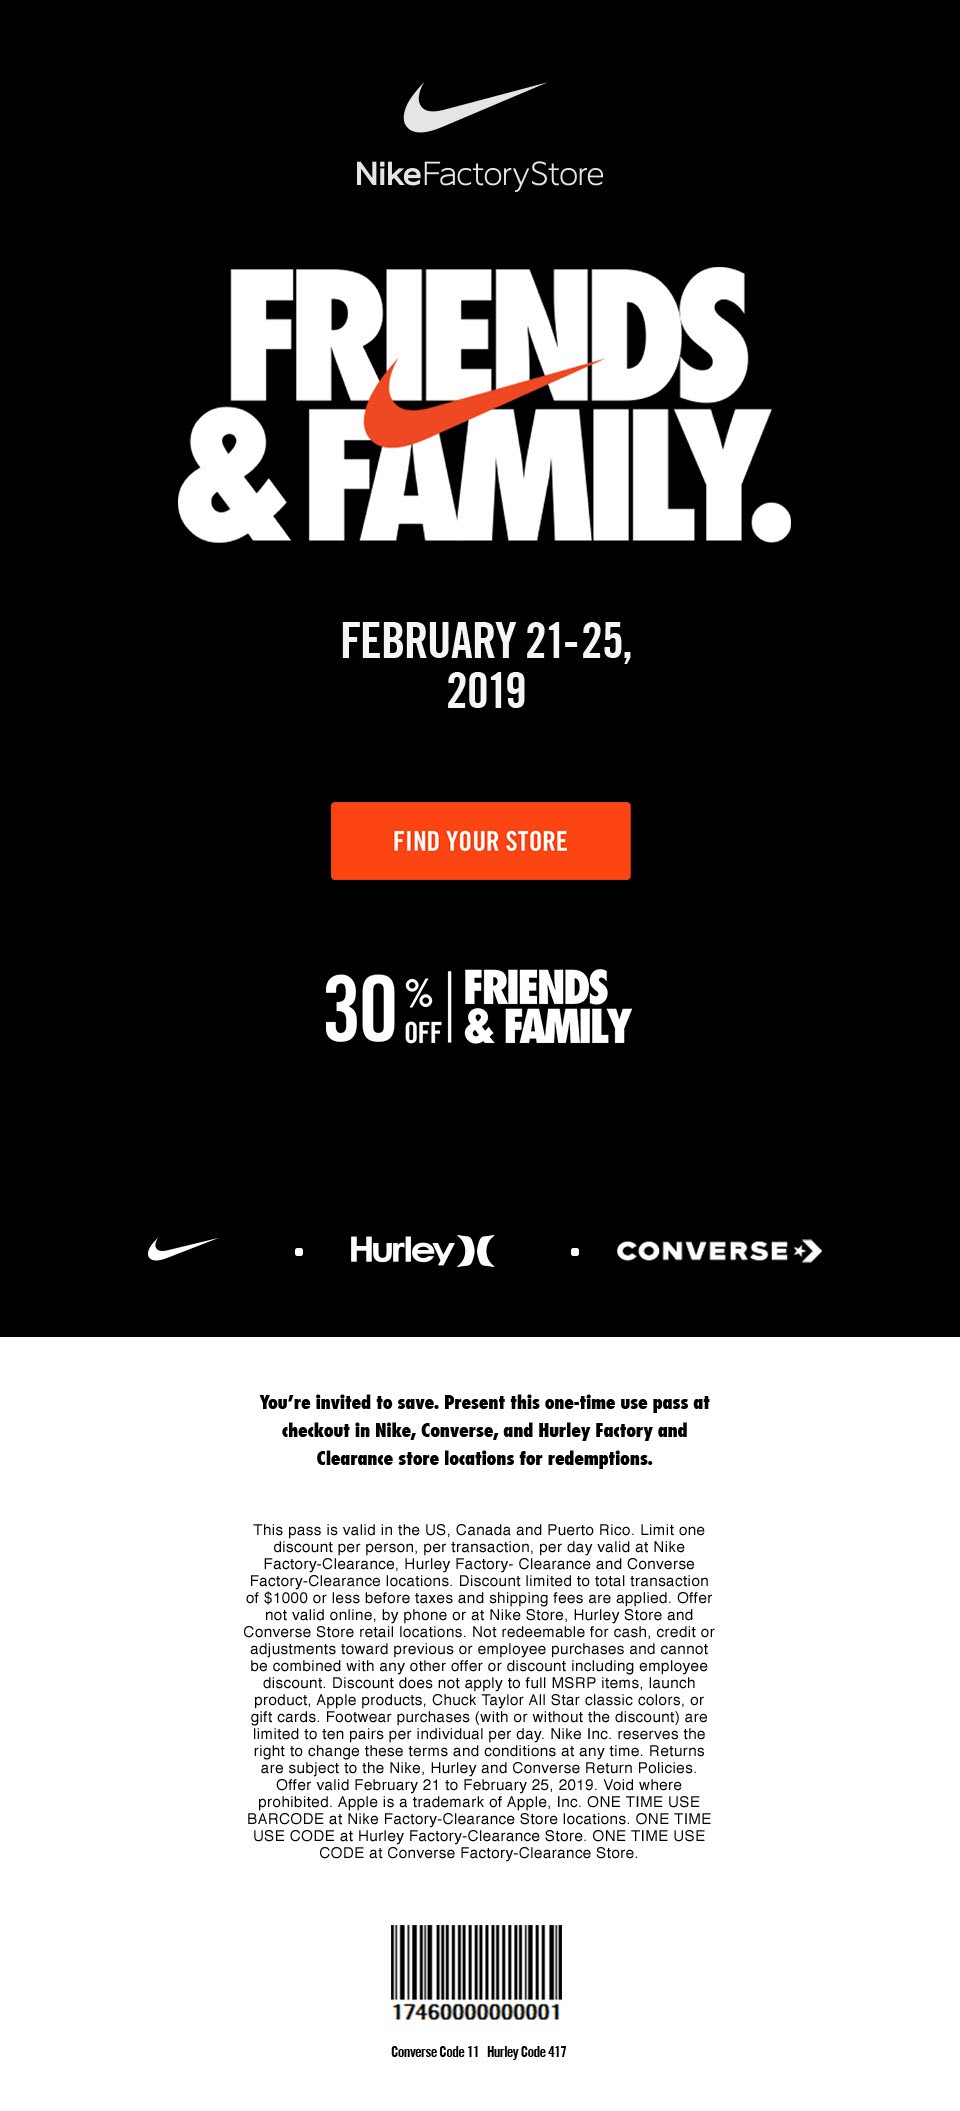 nike family and friends discount 2019